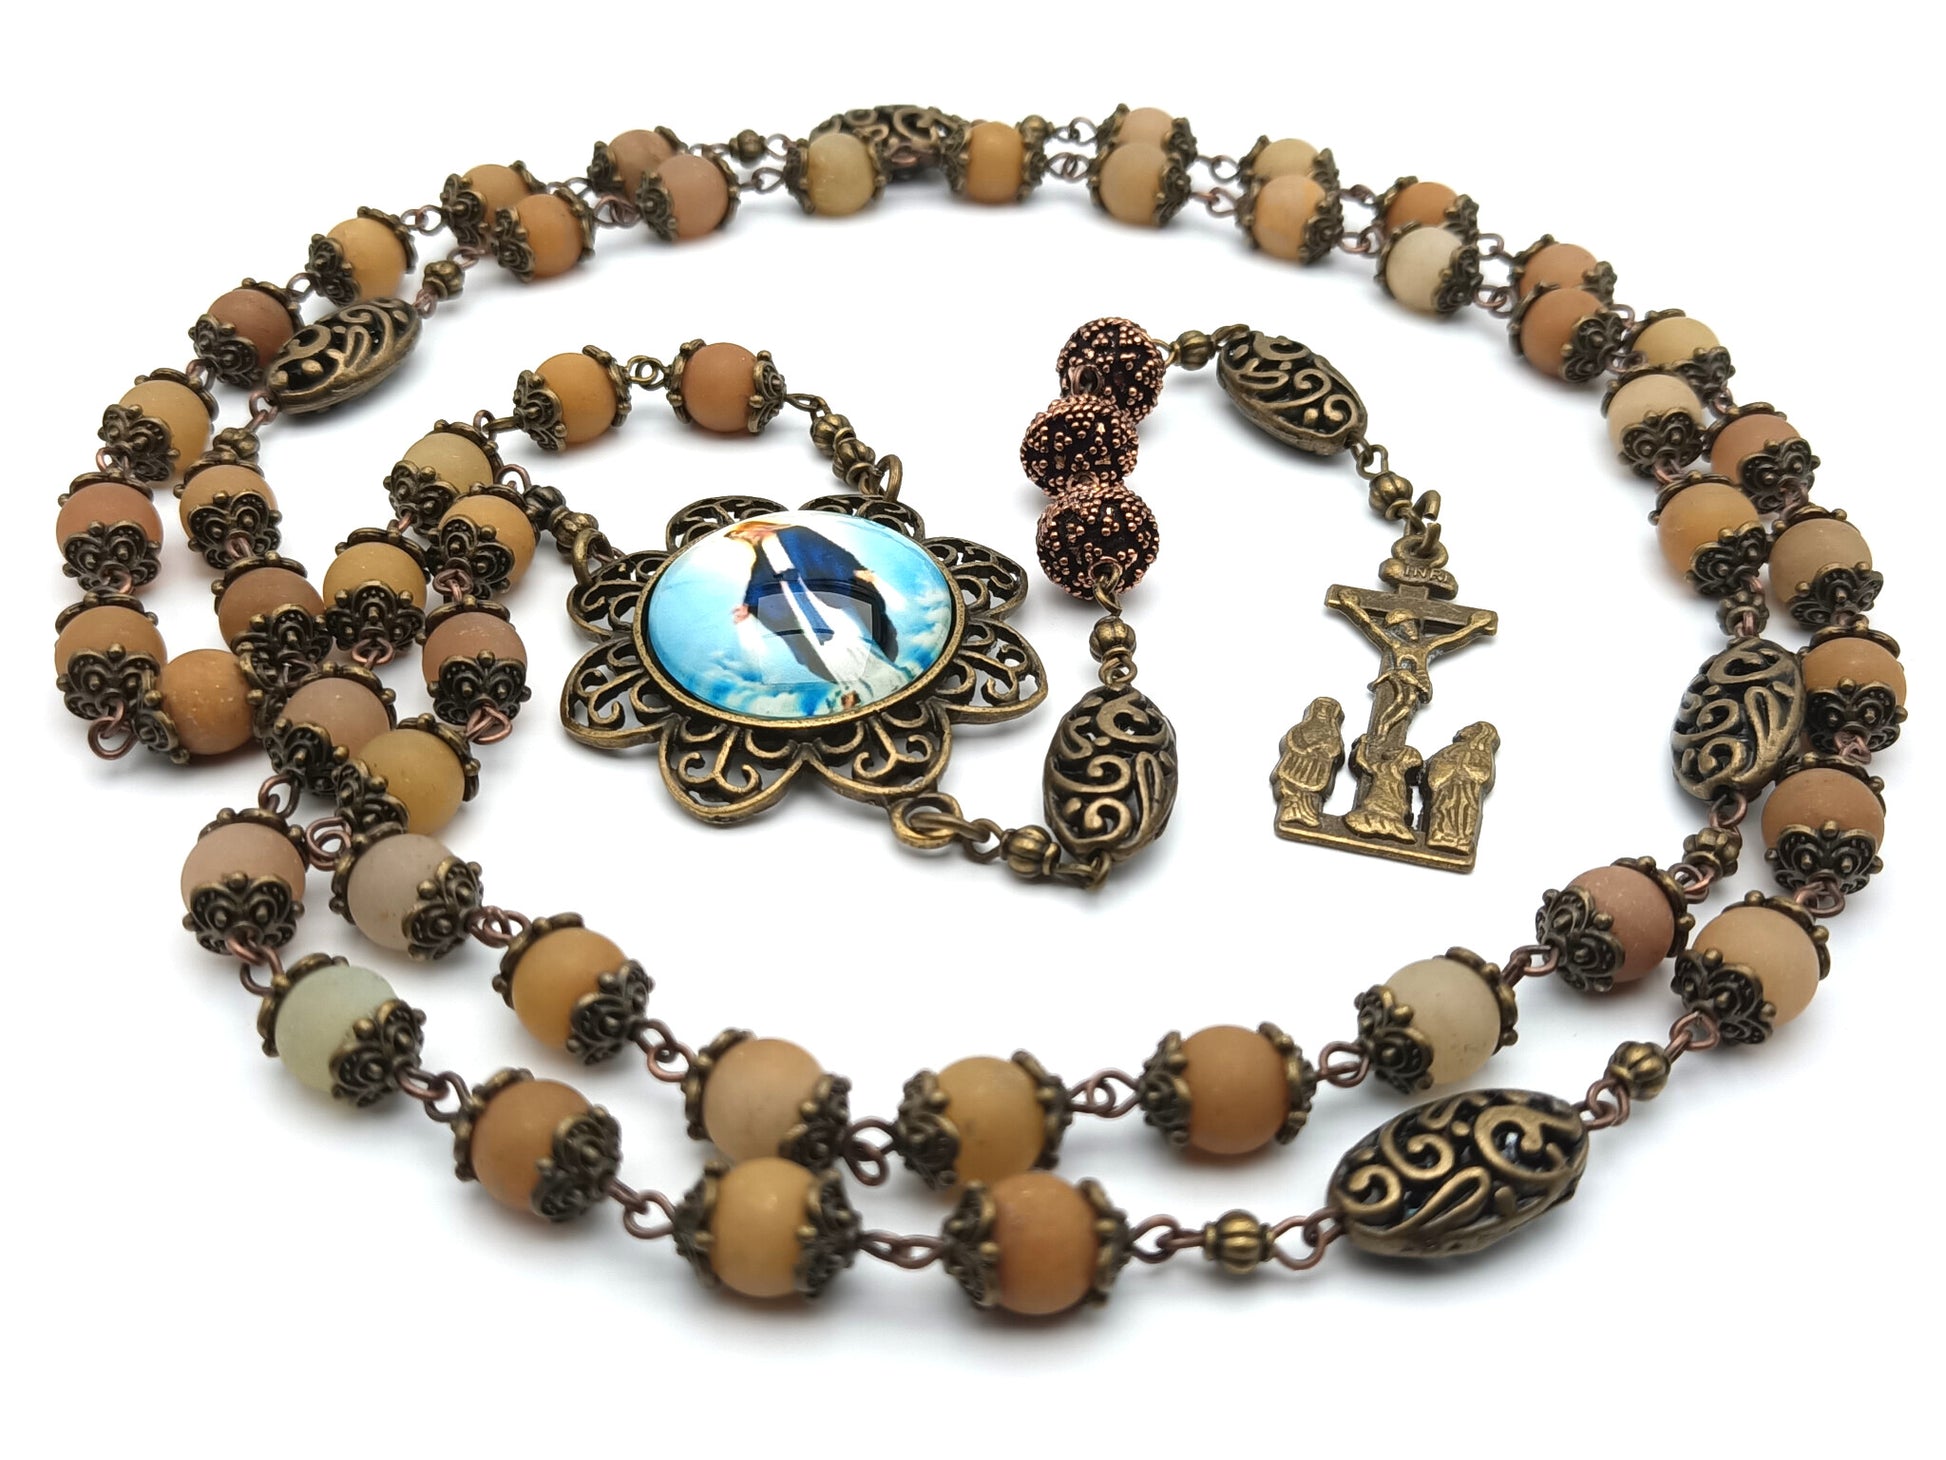 Our Lady of Grace unique rosary beads with gemstone beads, bronze two Marys crucifix, pater beads and picture centre medal.